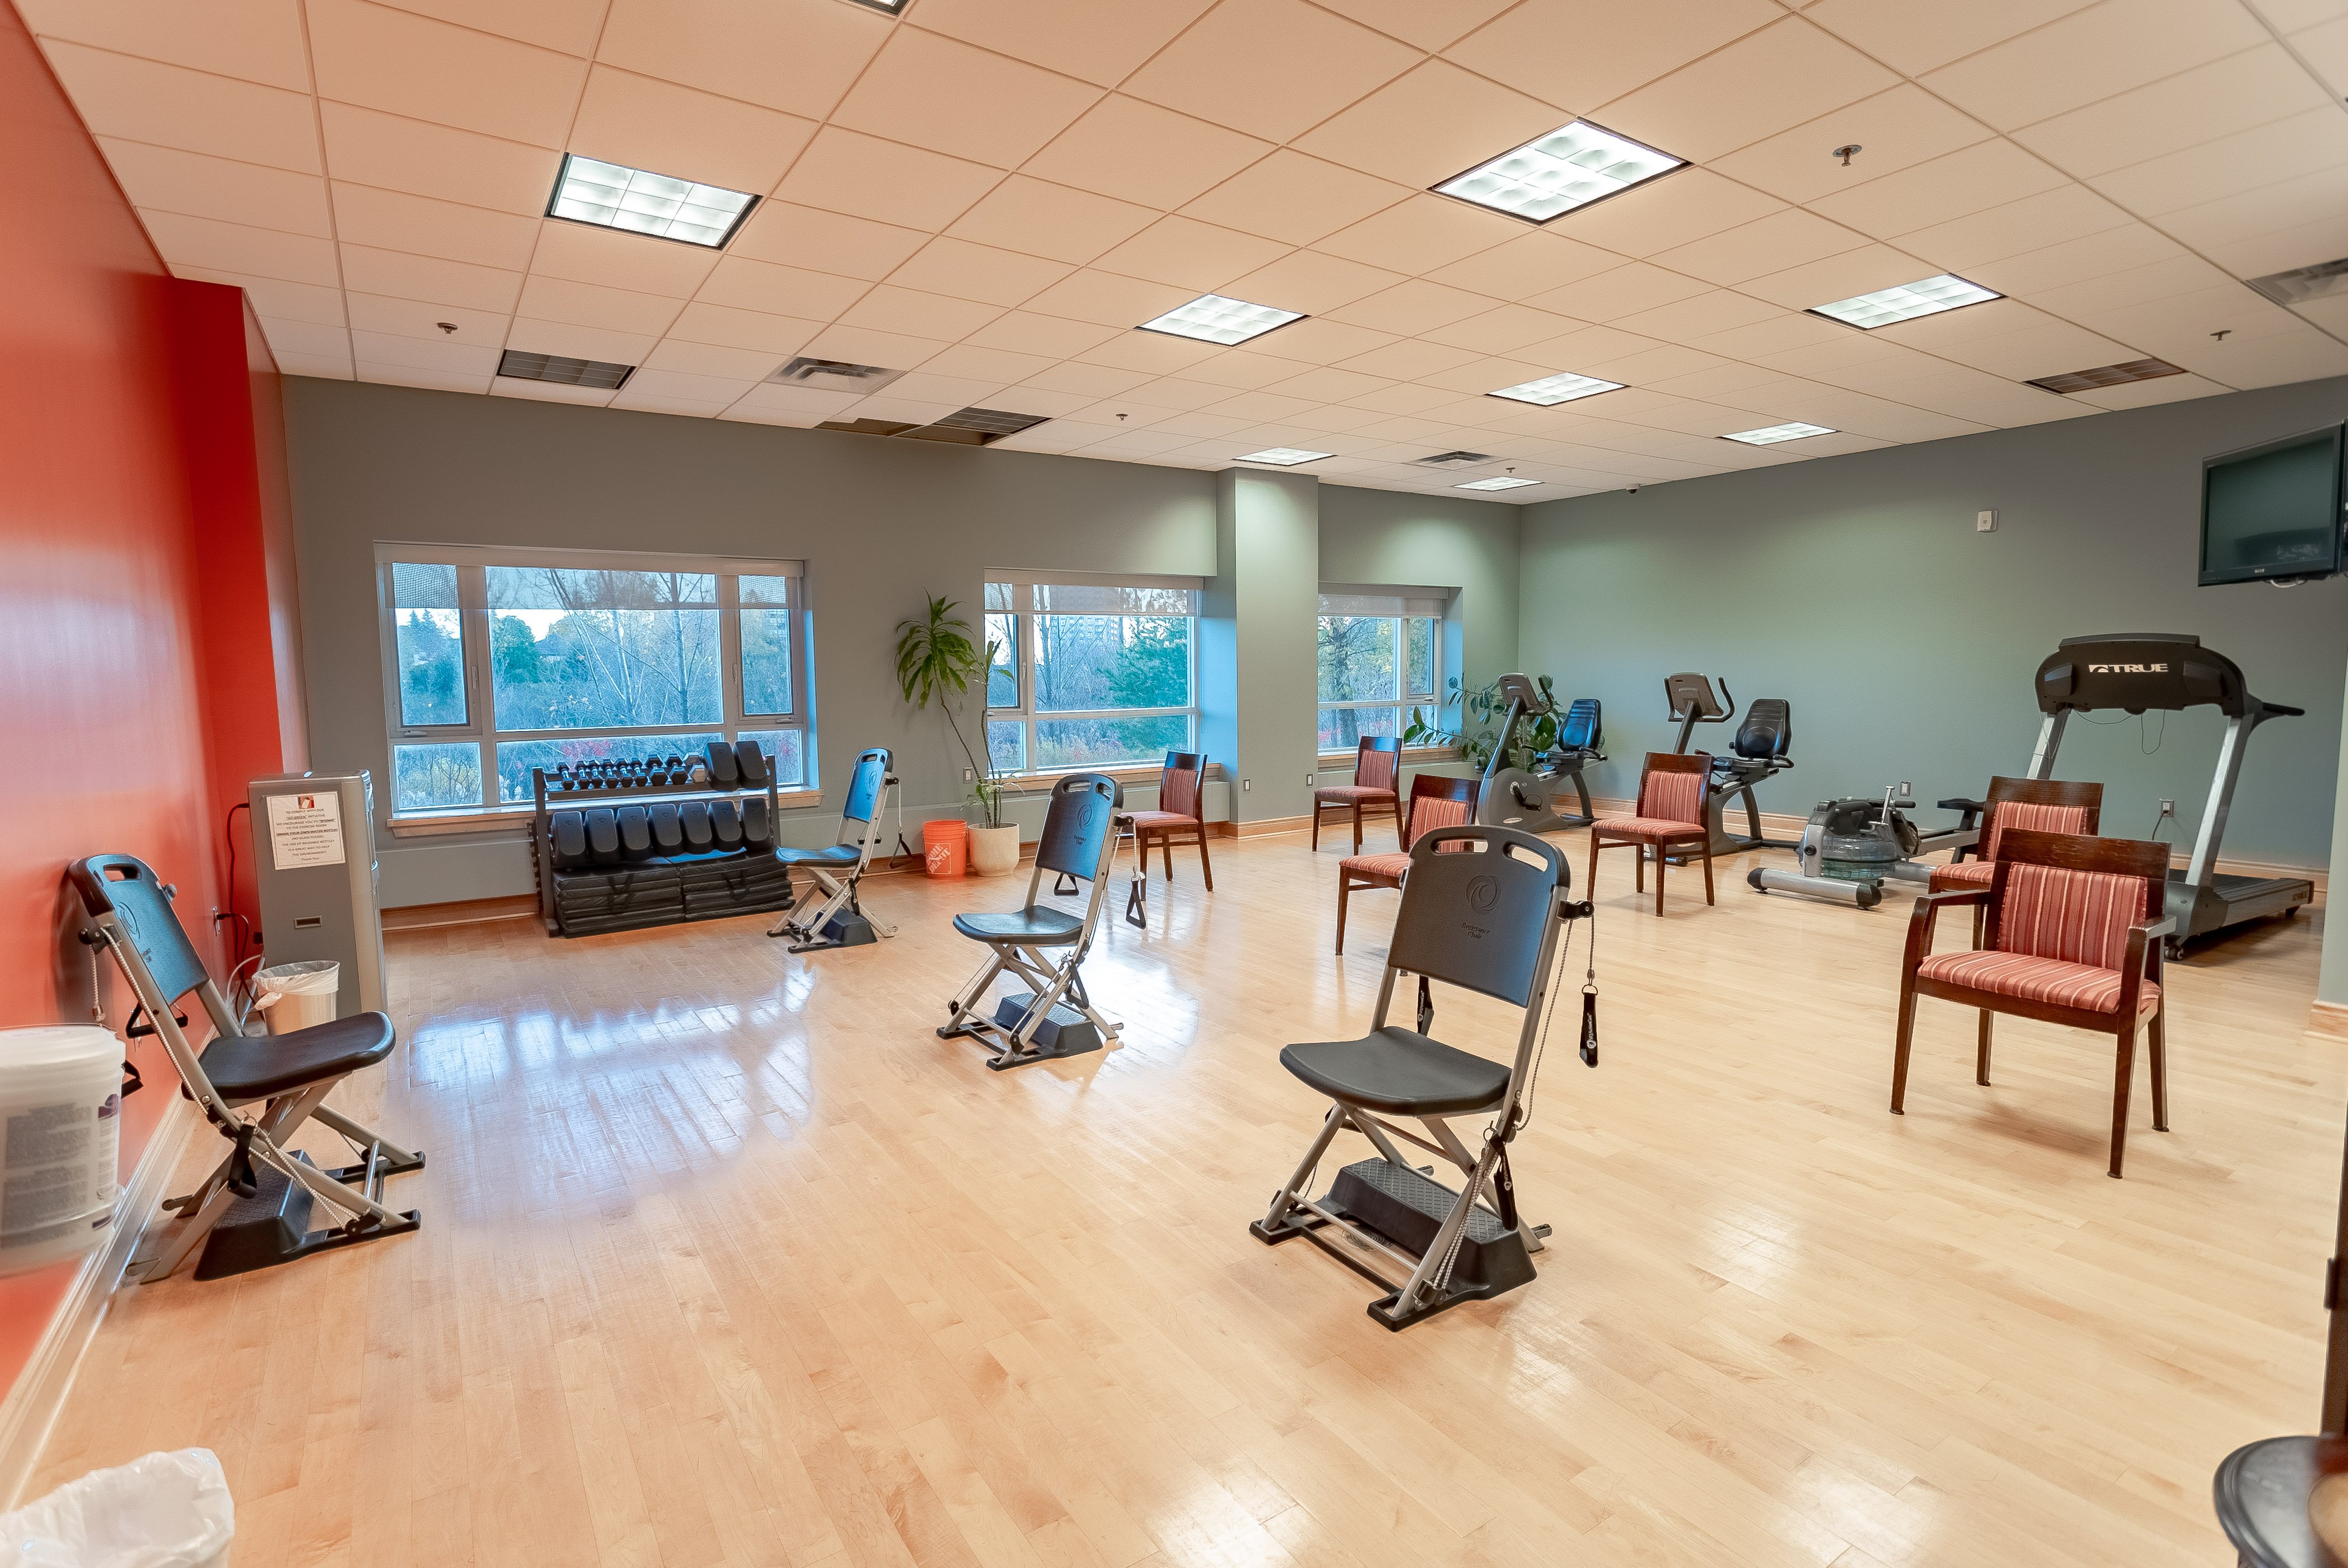 Exercise room at Royale Place Retirement Residence